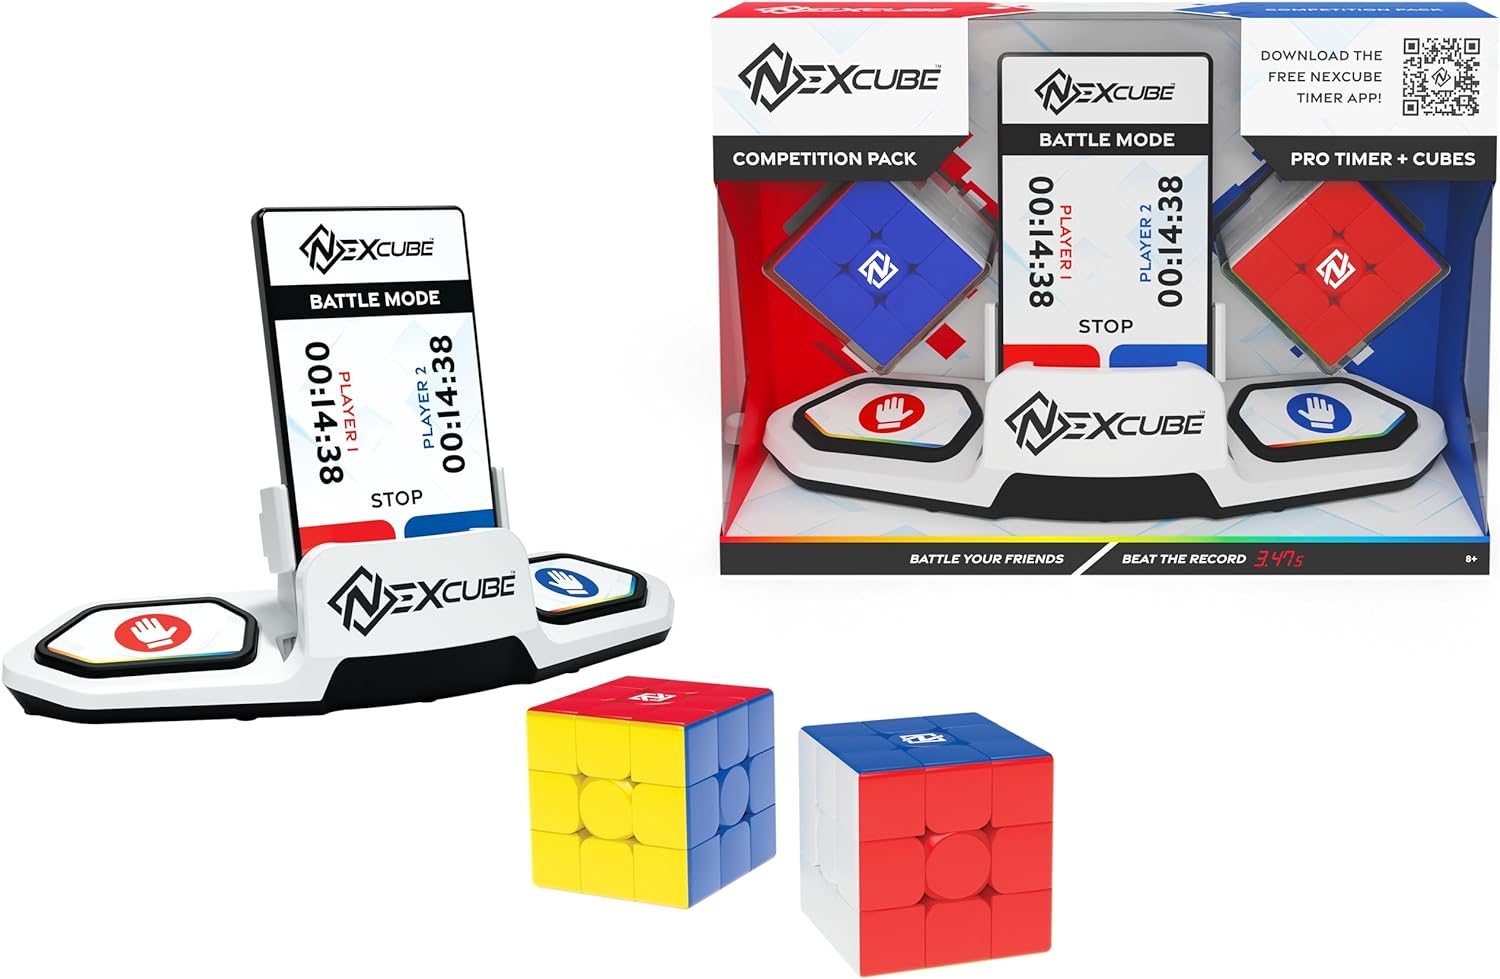 NEXCUBE COMPETITION PACK